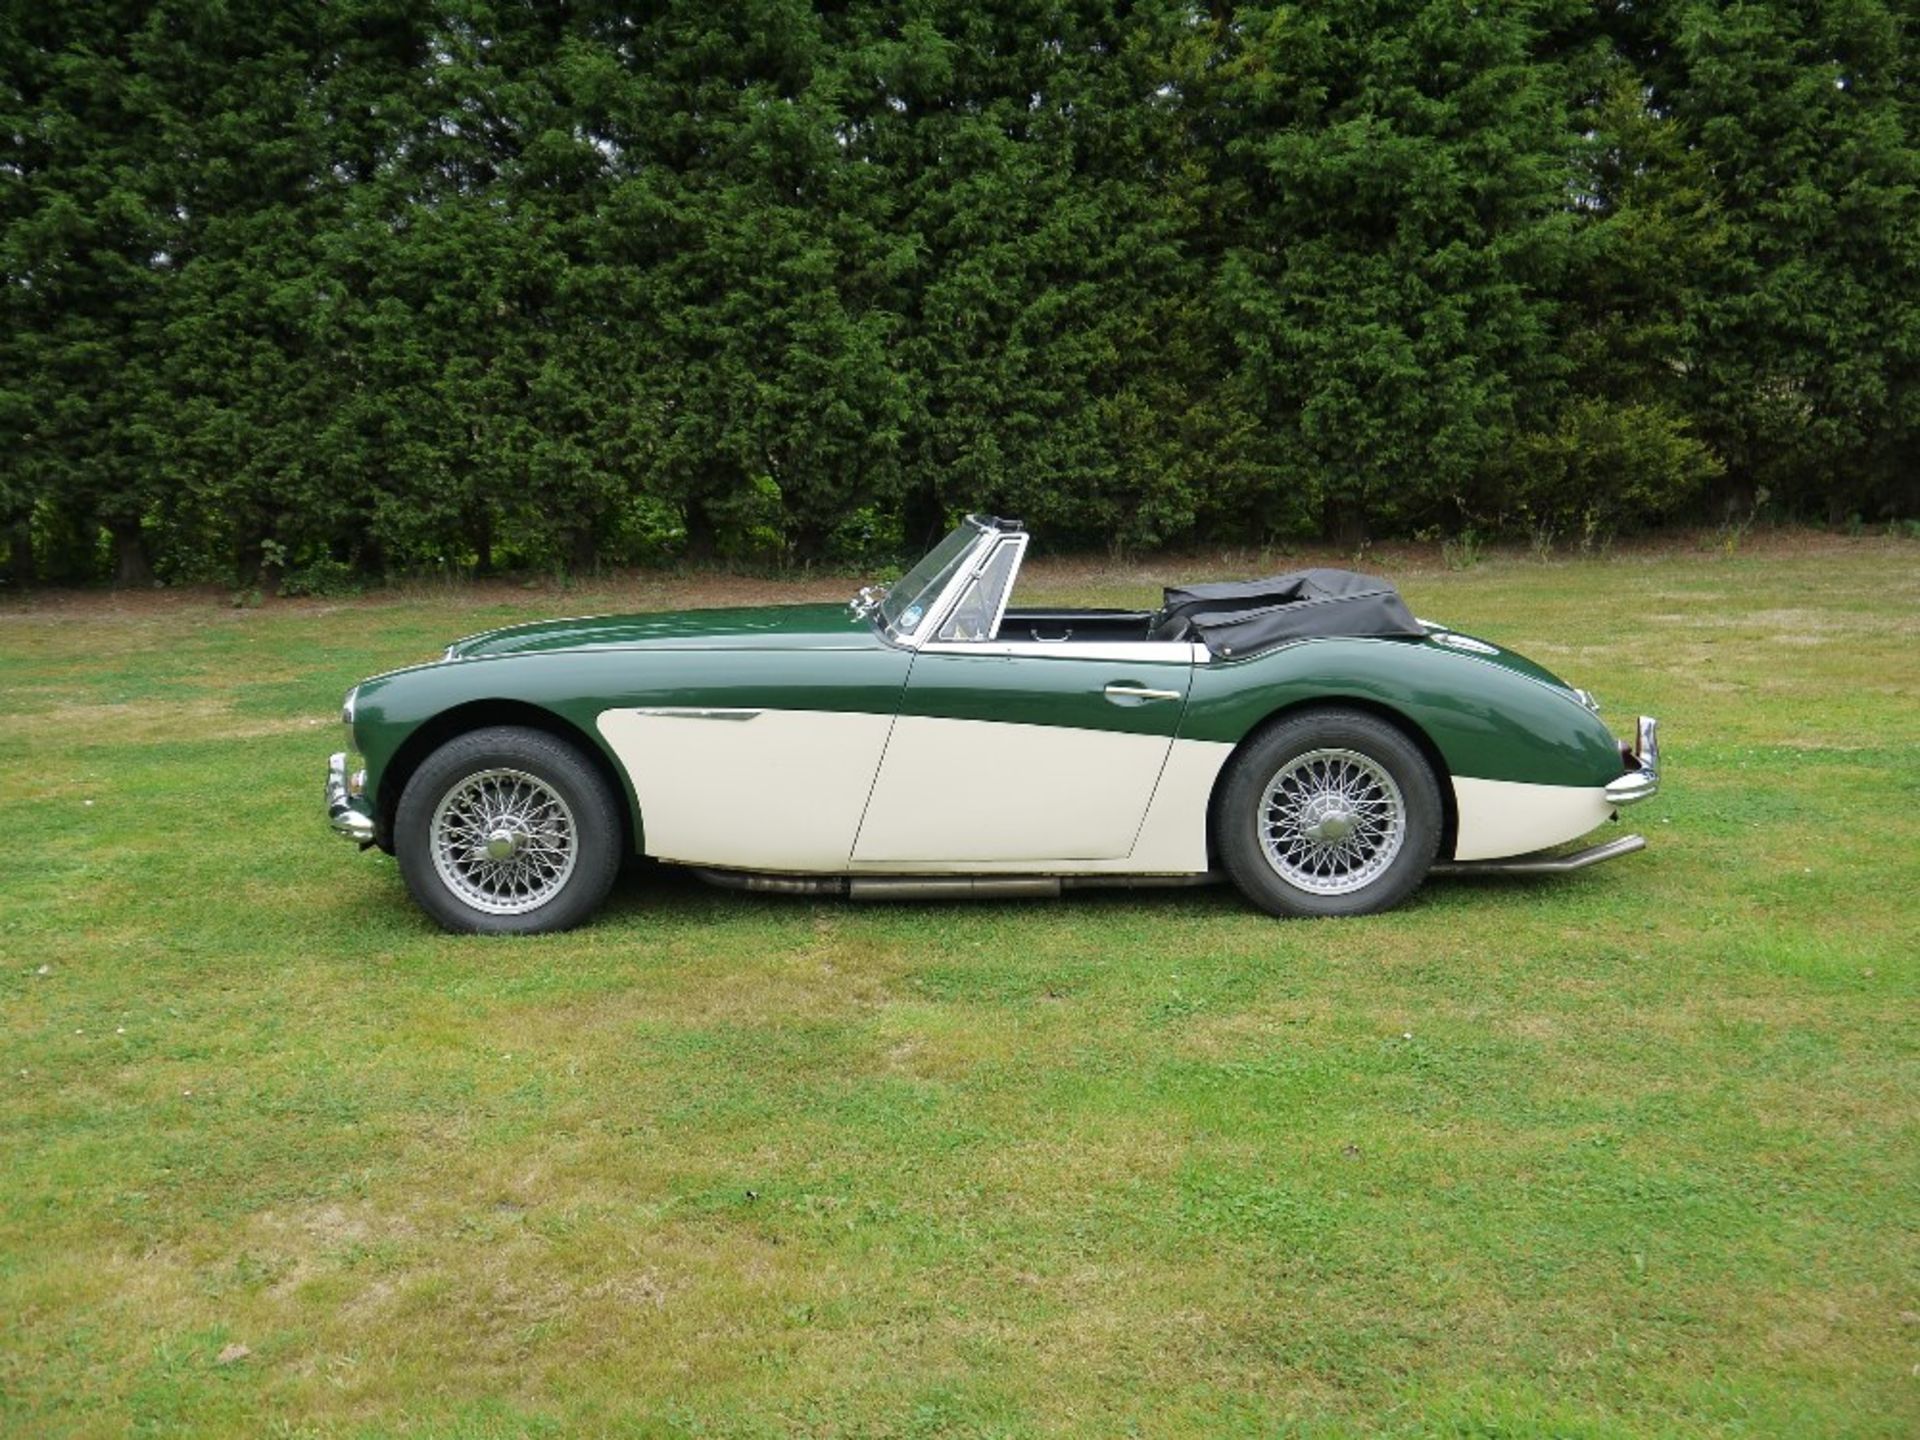 1963 AUSTIN-HEALEY 3000 MARK II Registration Number: MJF 346 Chassis Number: H-BJ7-24376 Recorded - Image 3 of 22